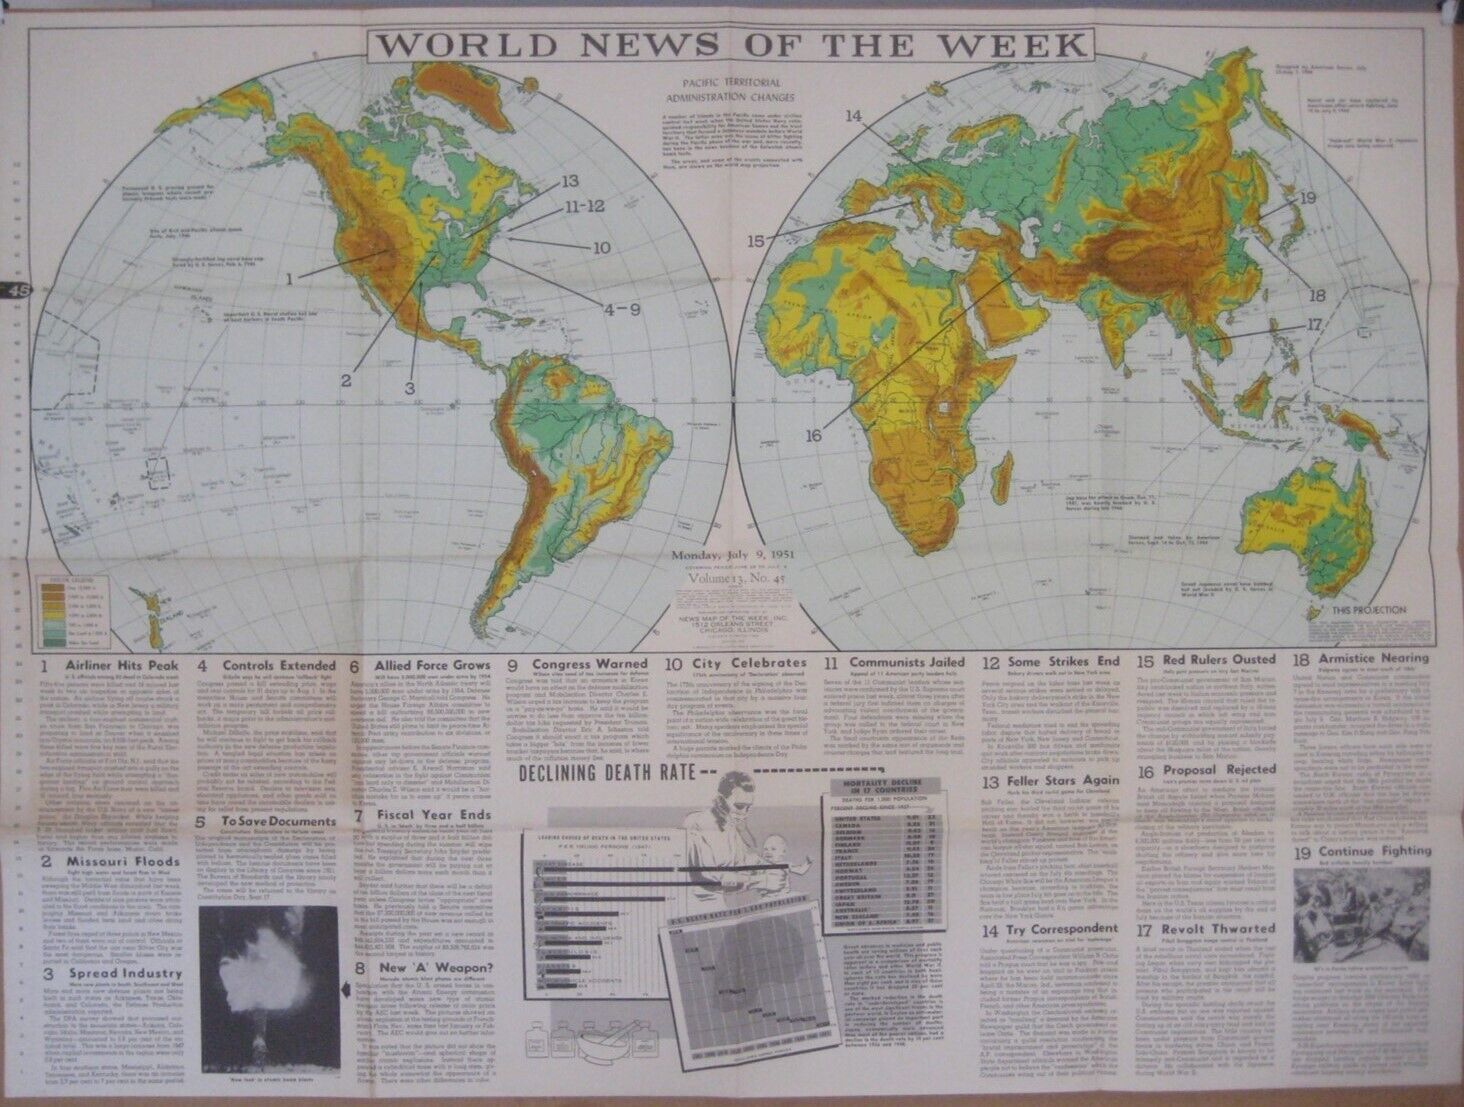 1951 COLD WAR World News Map Poster A-Bomb Test Korea Iran Oil Red Rulers Ousted